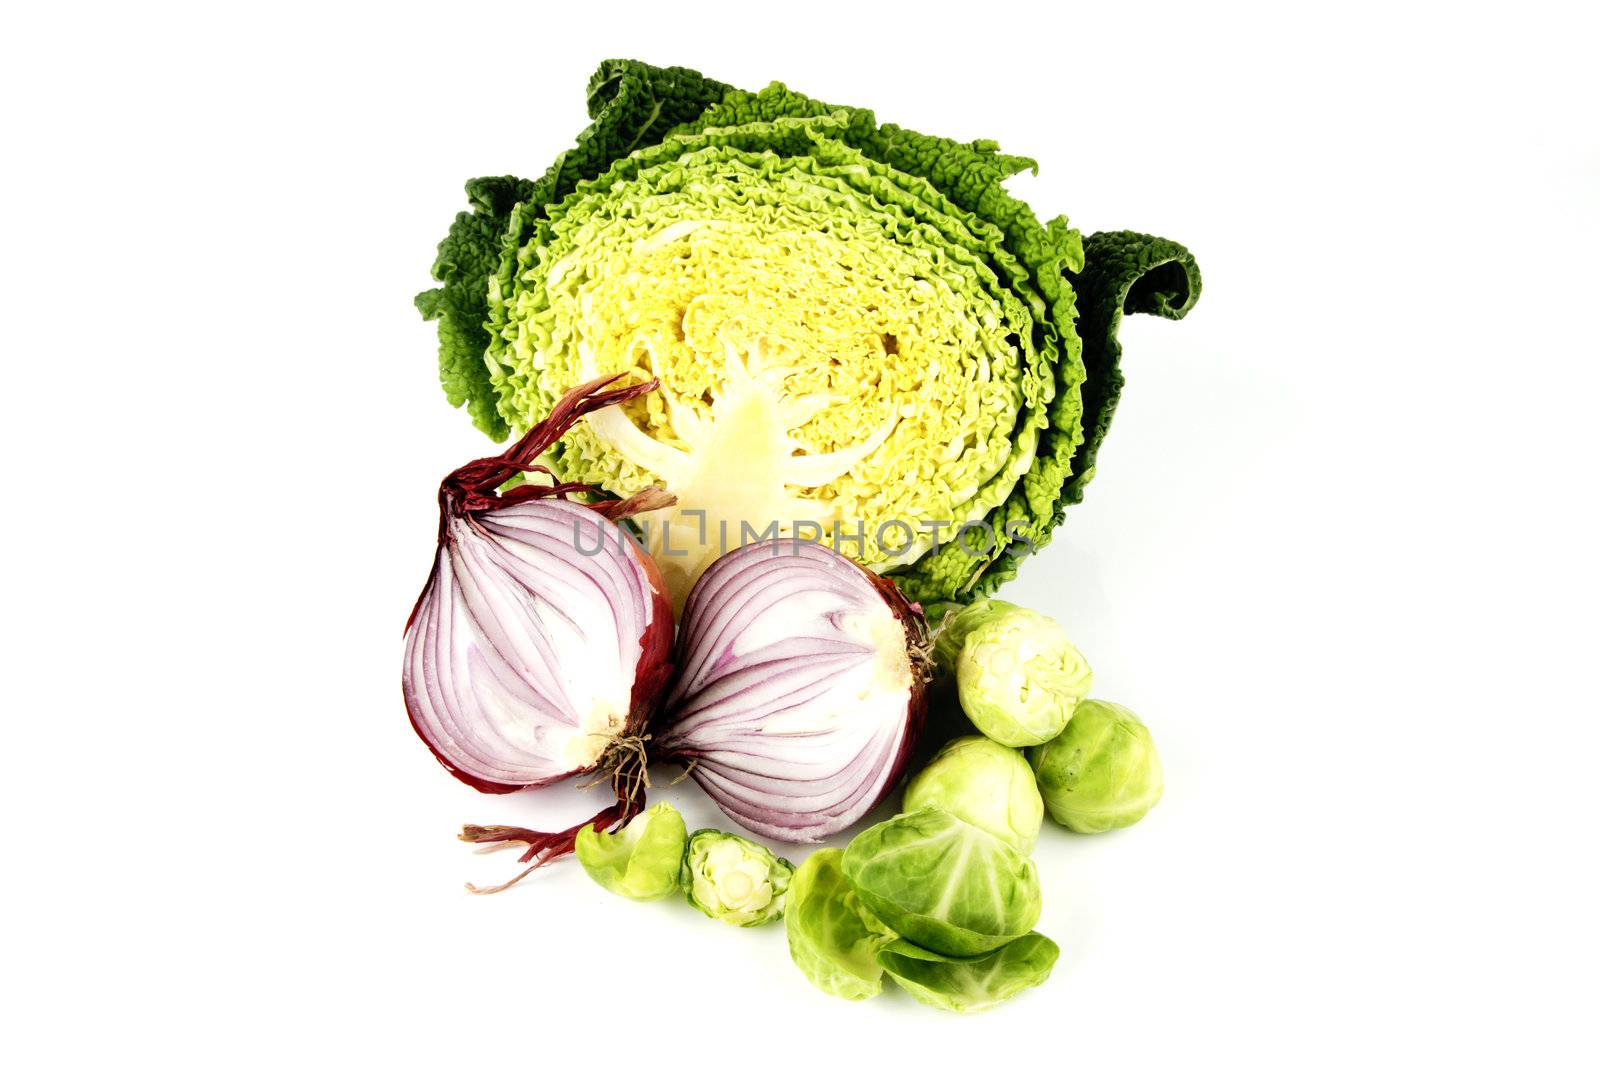 Half a raw green cabbage with a red onion cut in half and peeled sprouts on a reflective white background